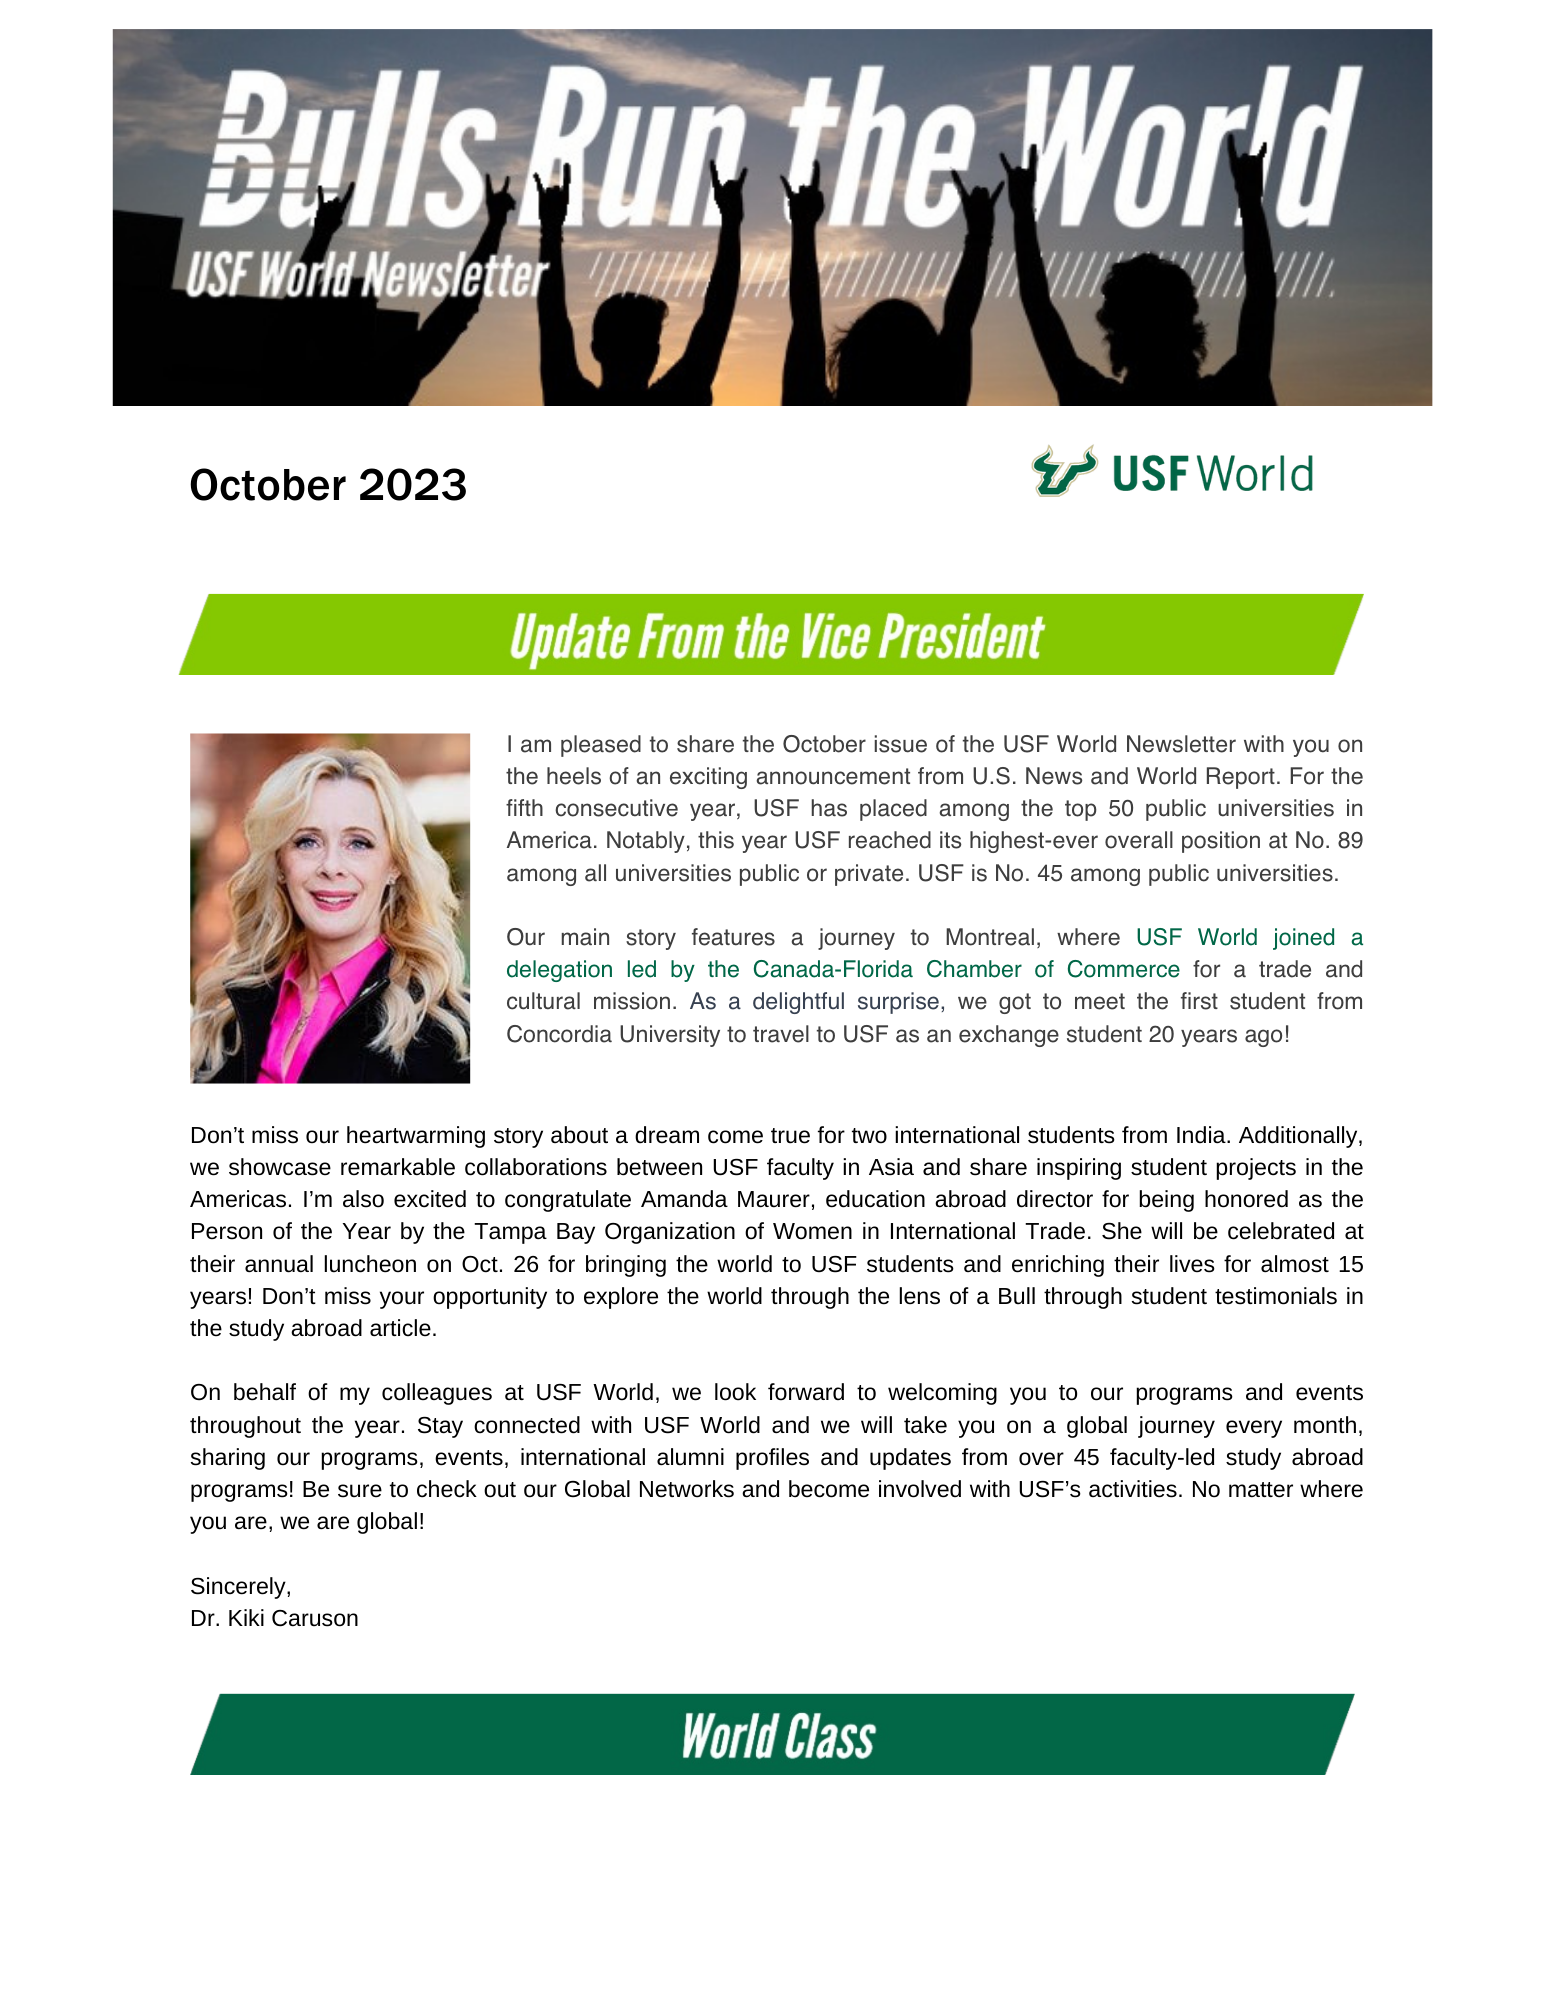 cover of October edition of Bulls Run the World newsletter